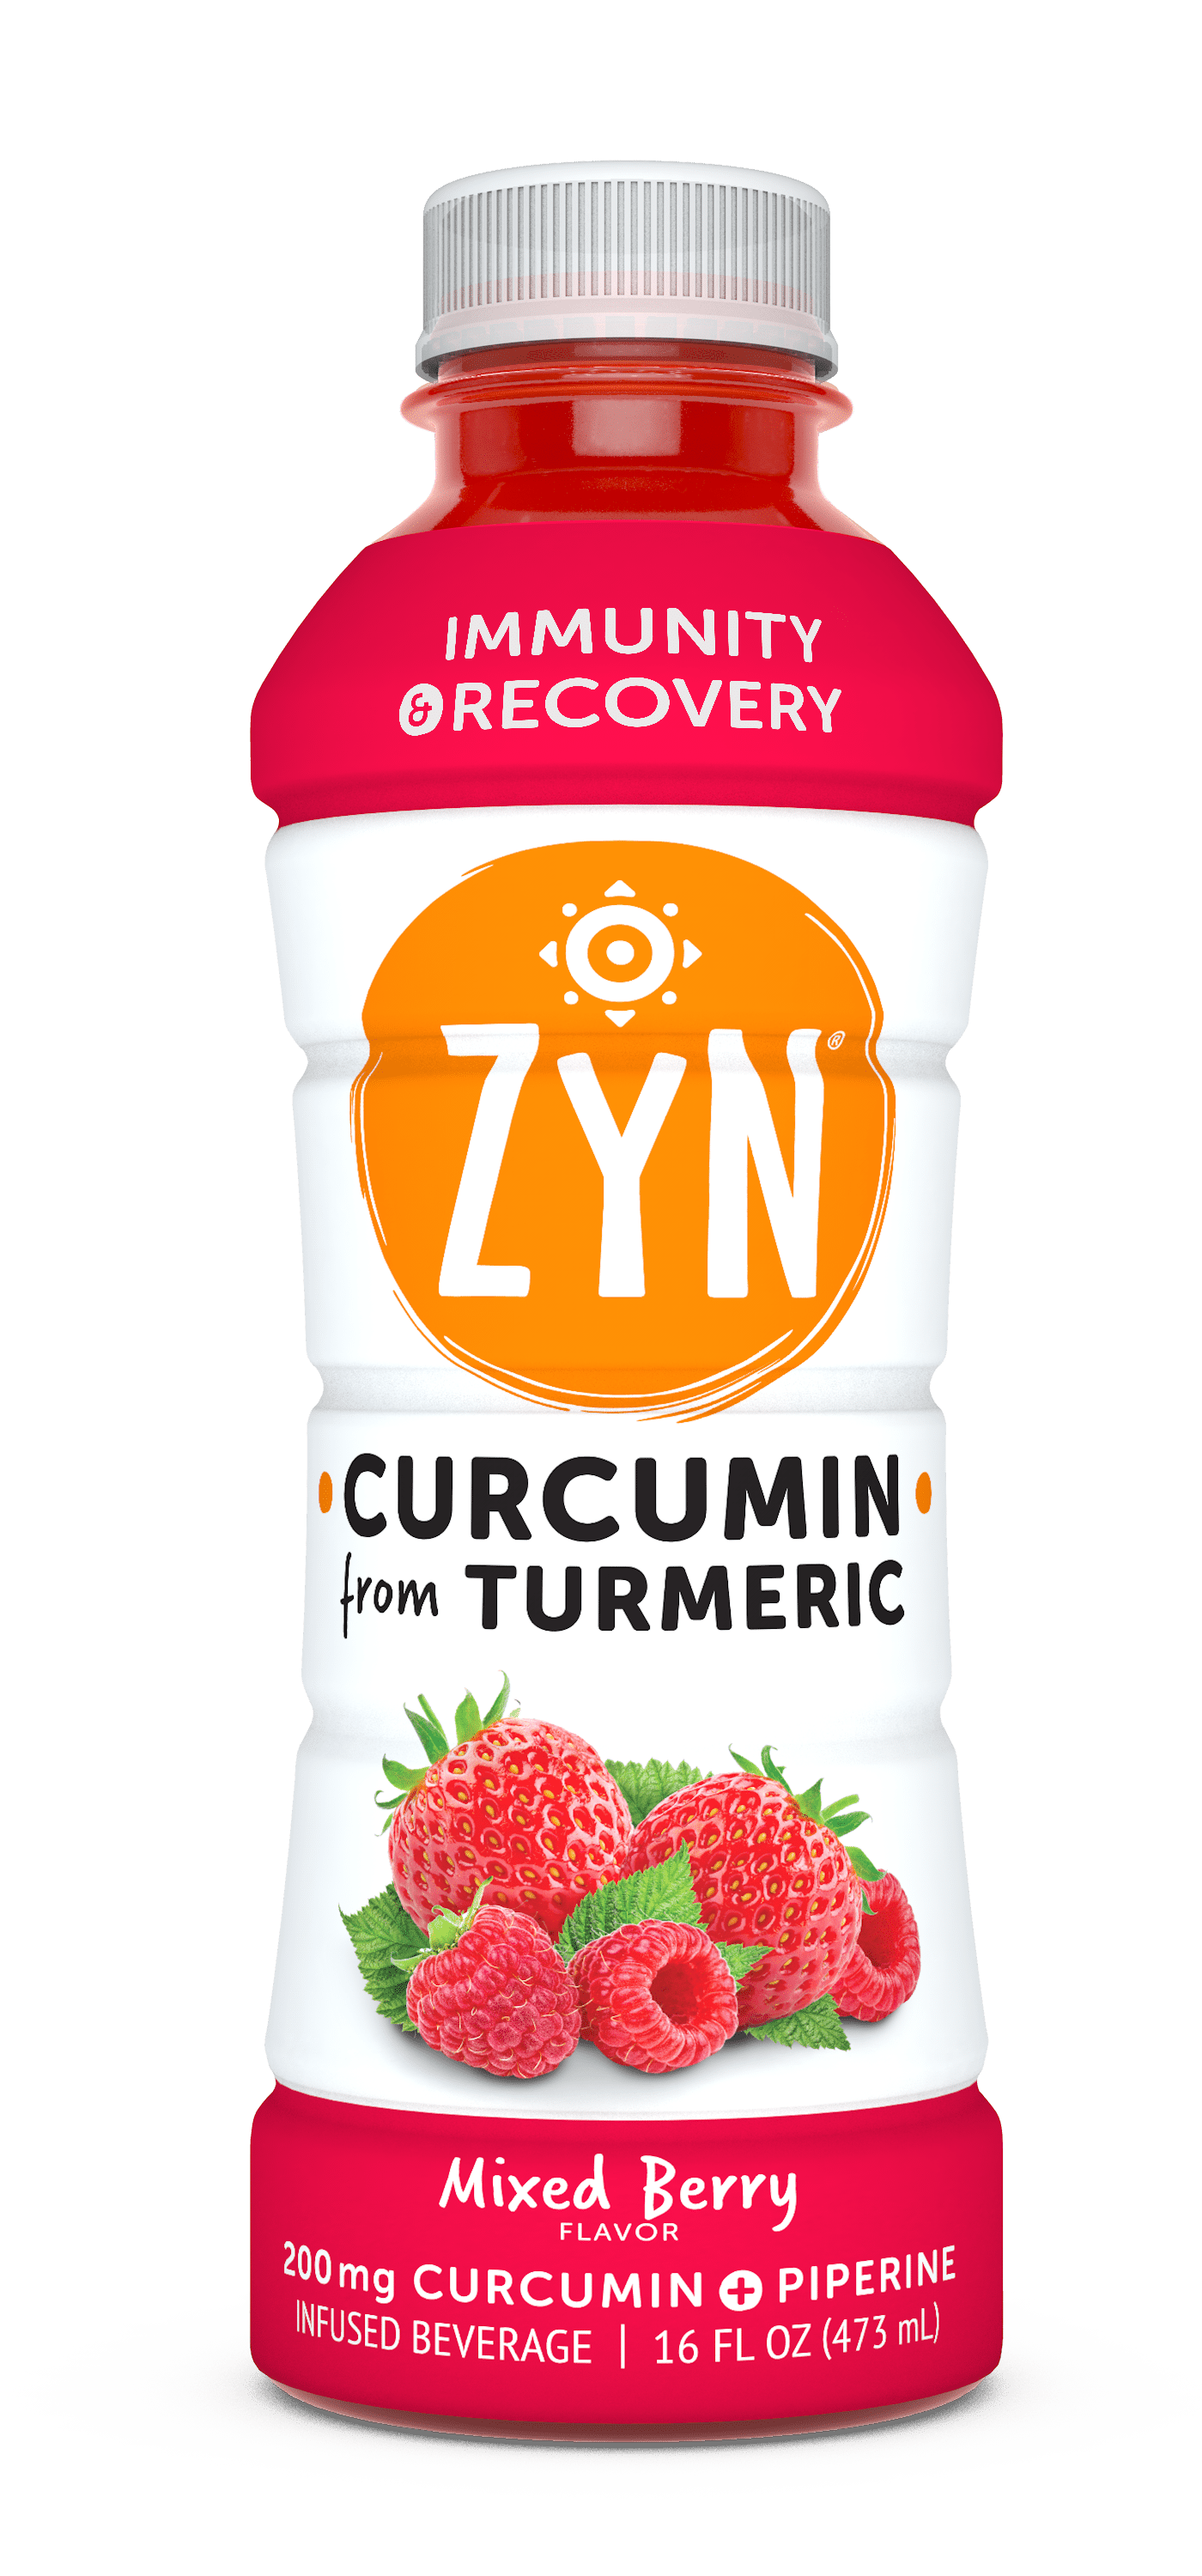 ZYN Immunity & Recovery Drinks - Mixed Berry Flavor 12 units per case 16.0 fl